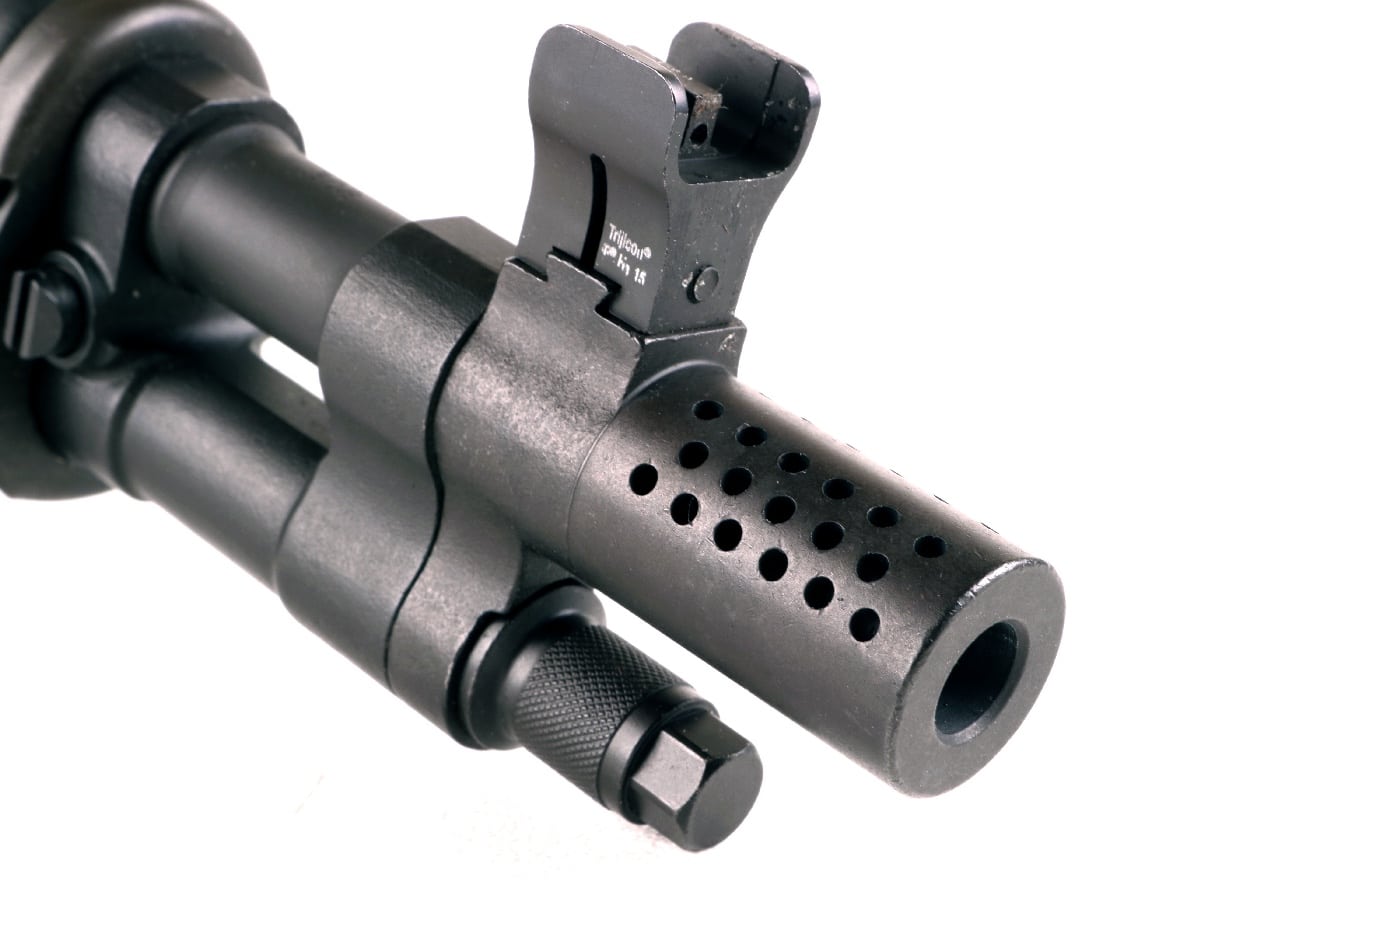 Shown is the Springfield Armory muzzle brake for the M1A SOCOM 16 rifle. A muzzle brake or recoil compensator is a device connected to, or a feature integral to the construction of, the muzzle or barrel of a firearm or cannon that is intended to redirect a portion of propellant gases to counter recoil and unwanted muzzle rise.